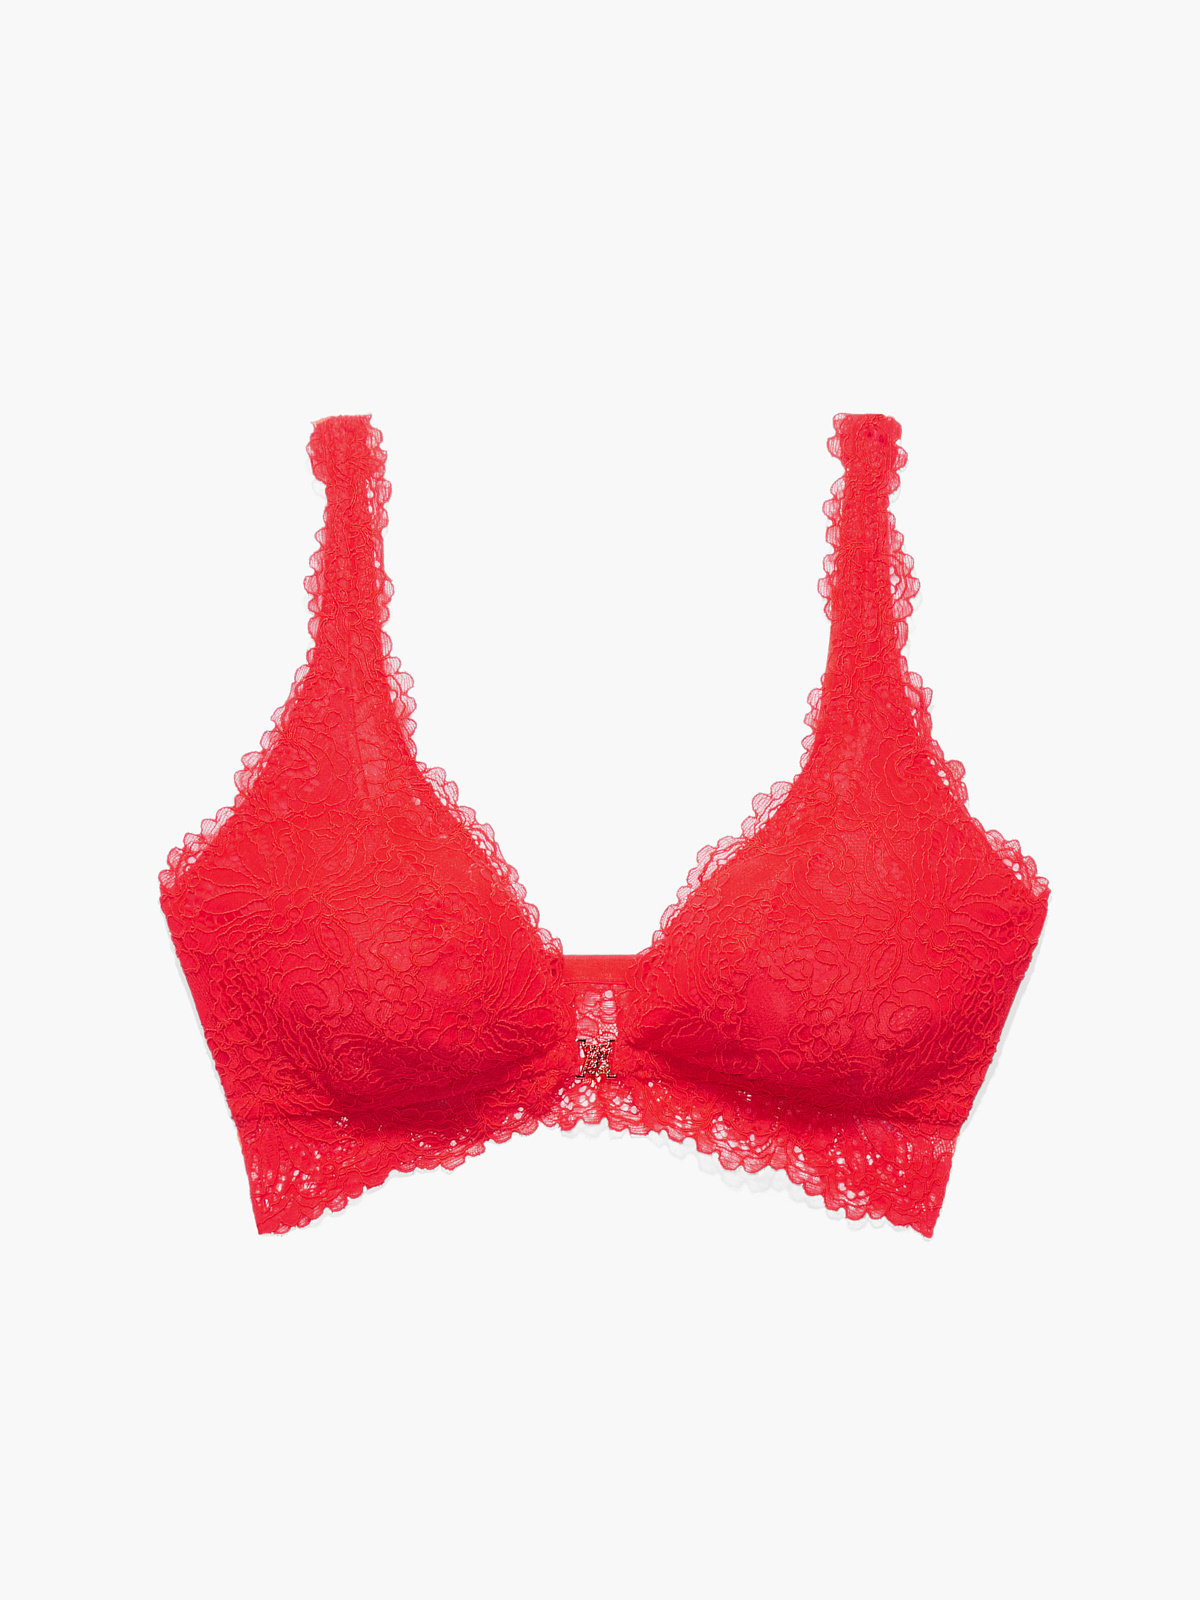 Missguided Bralette Red Corded Lace Bralette Bra With Back Zipper sz 6  Small NWT 